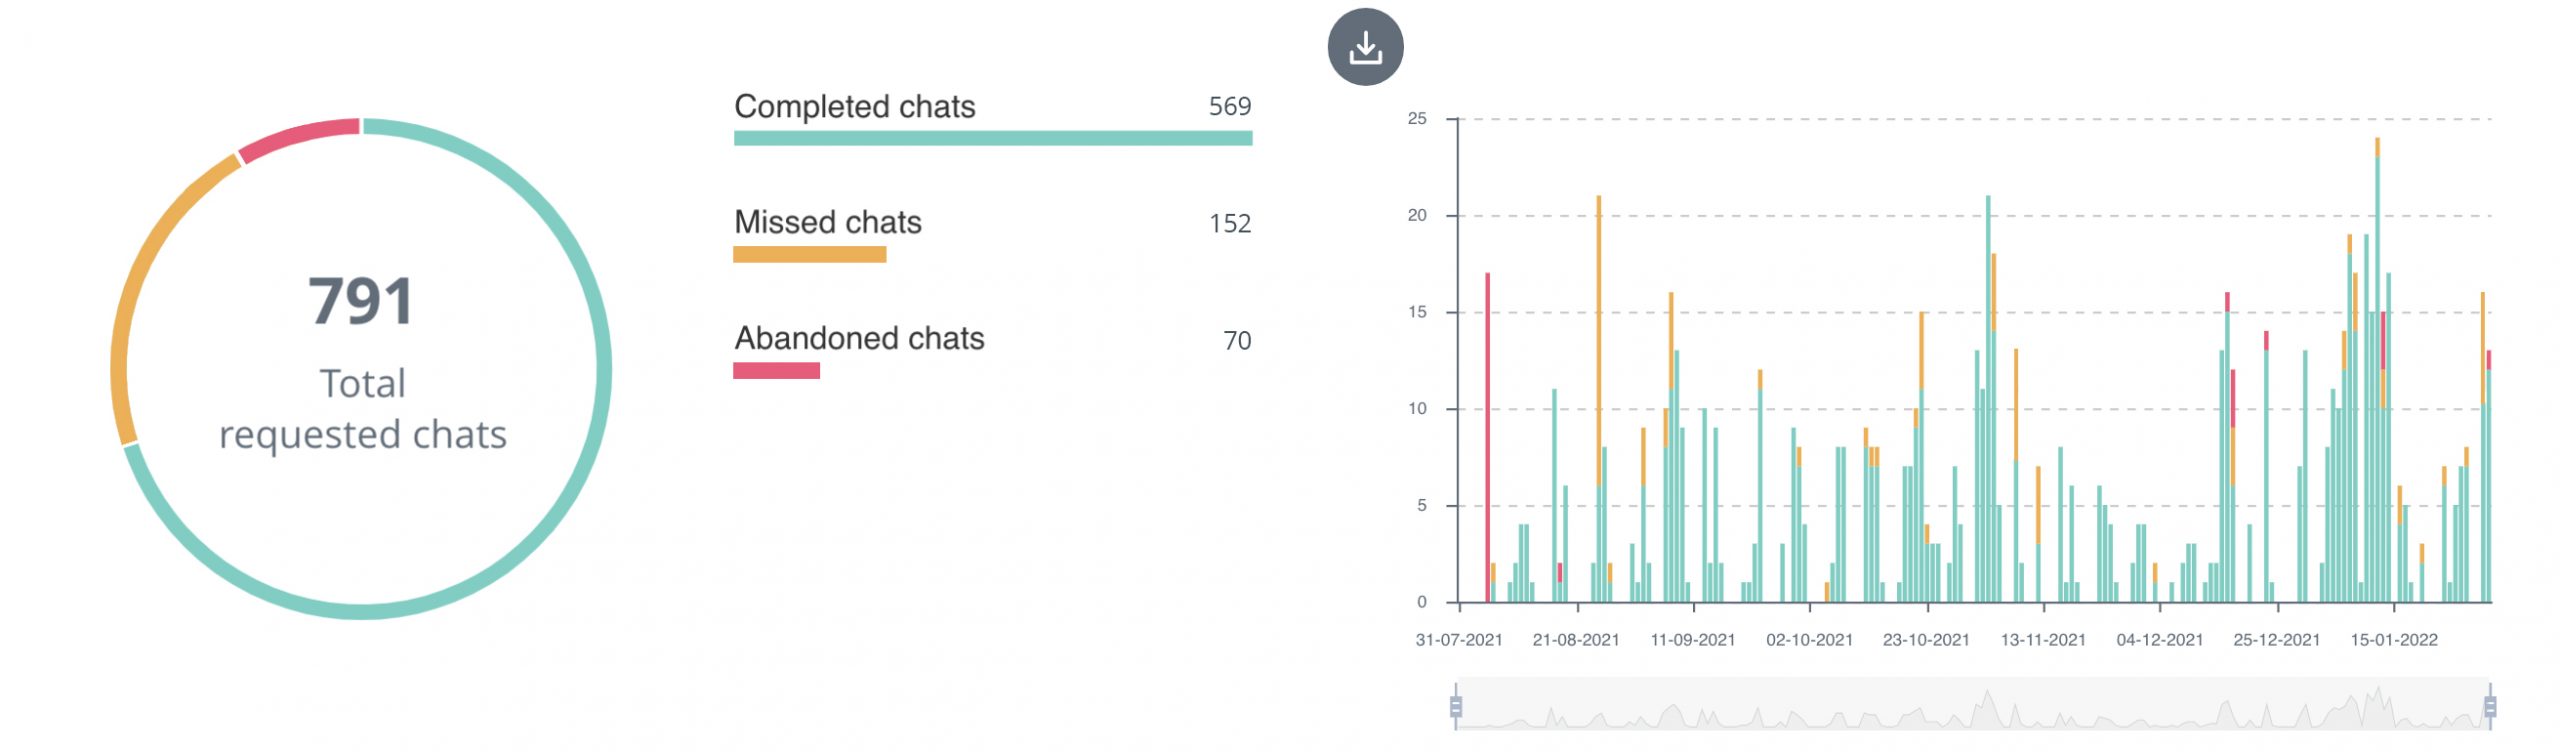 A graph showing chat activity